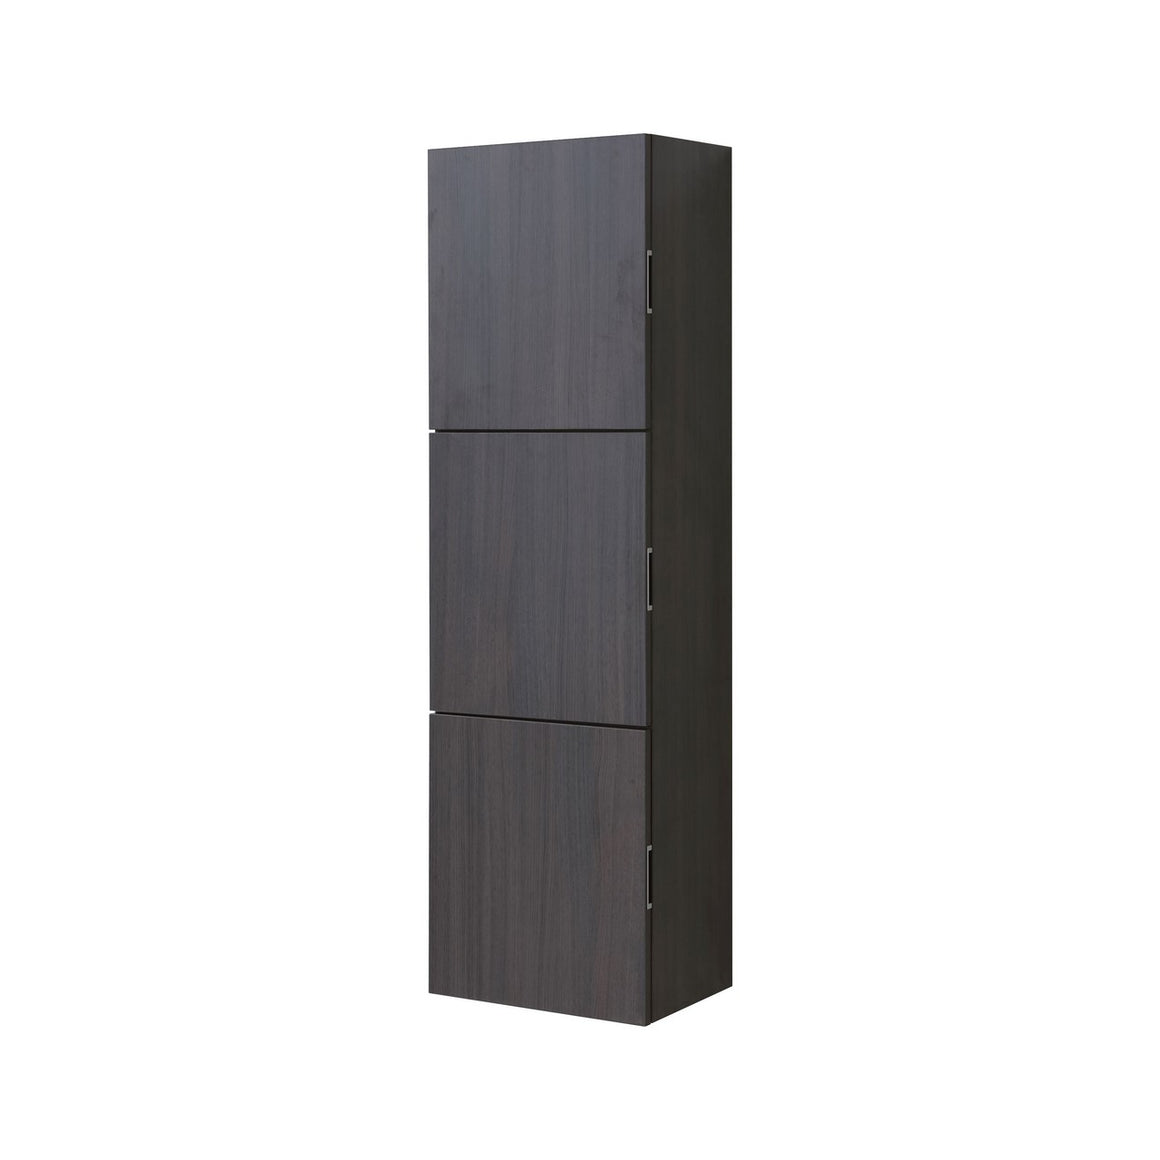 Bliss 18" Wide by 59" High Linen Side Cabinet With Three Doors in Gray Oak Finish